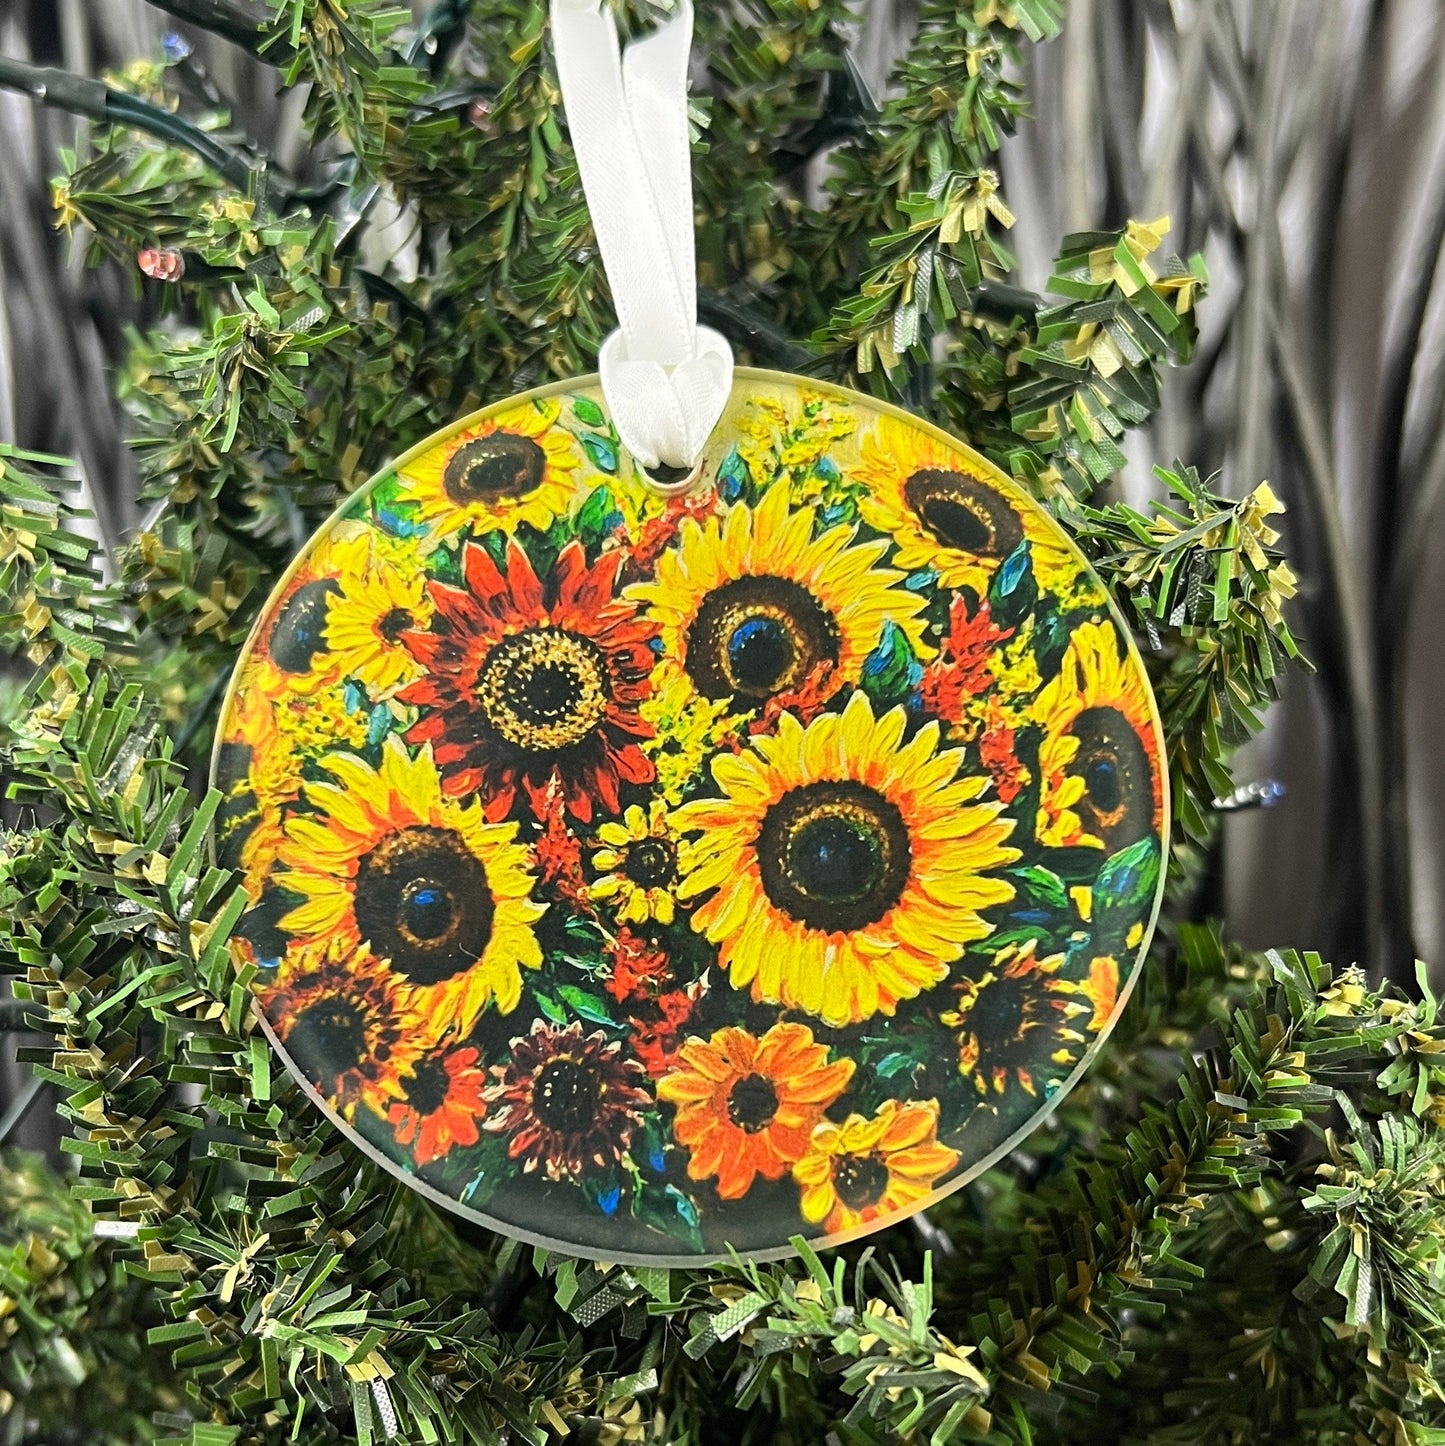 Nataliia Sytnyk “Bouquet of Sunflowers” Painting inspired Glass Ornament / Suncatcher